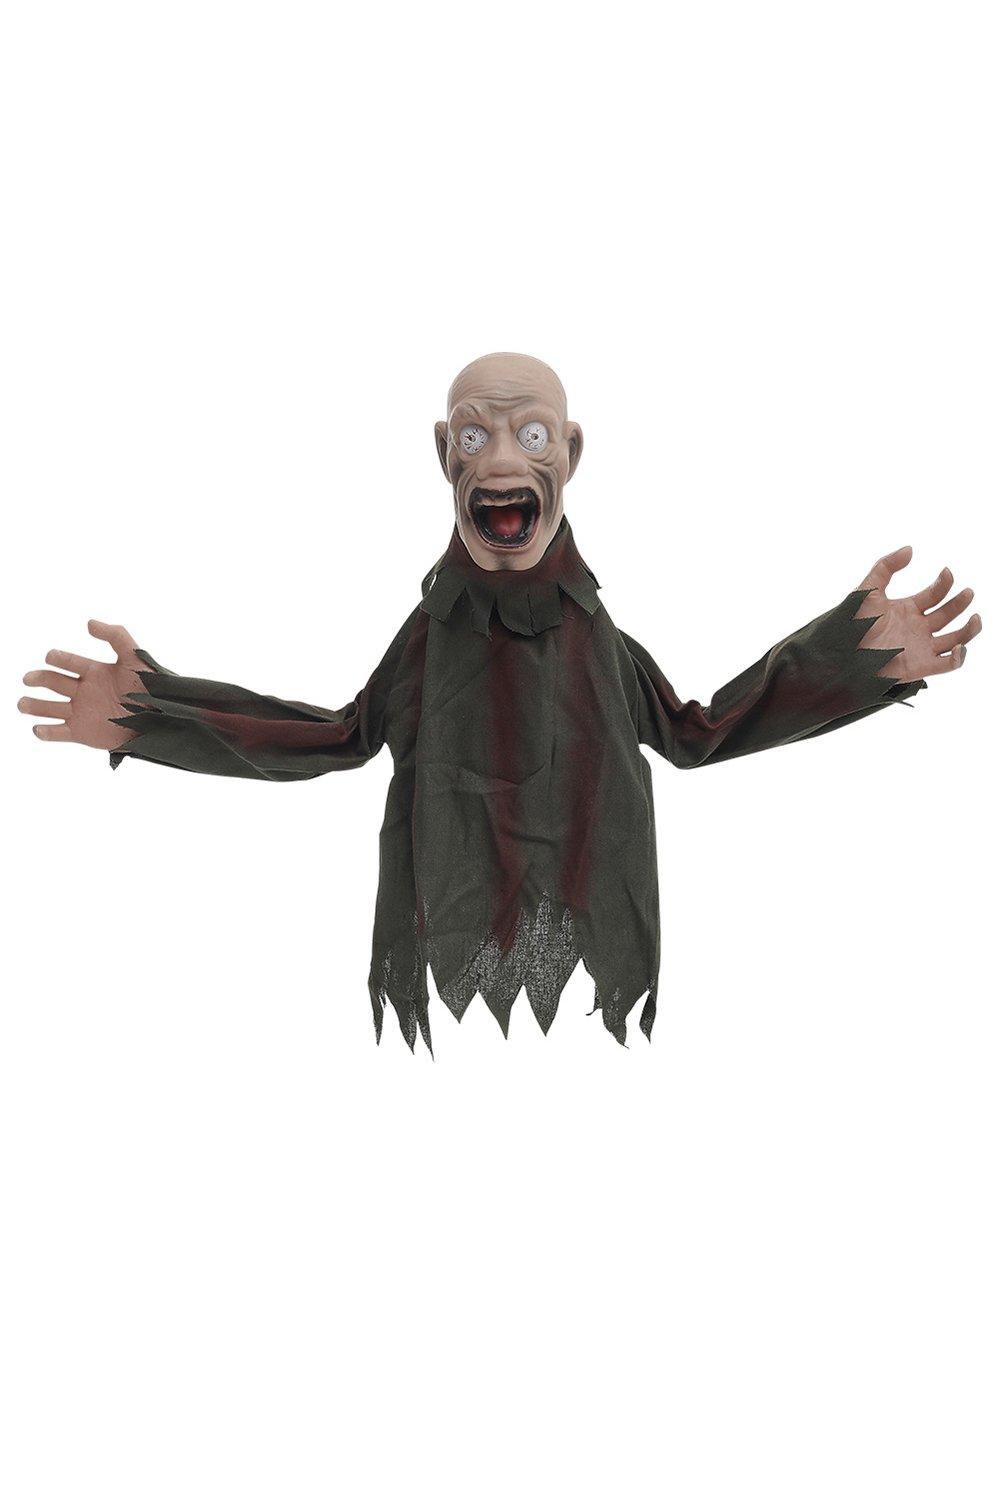 Outdoor Groundbreaker Zombie Props with LED Glowing Eyes